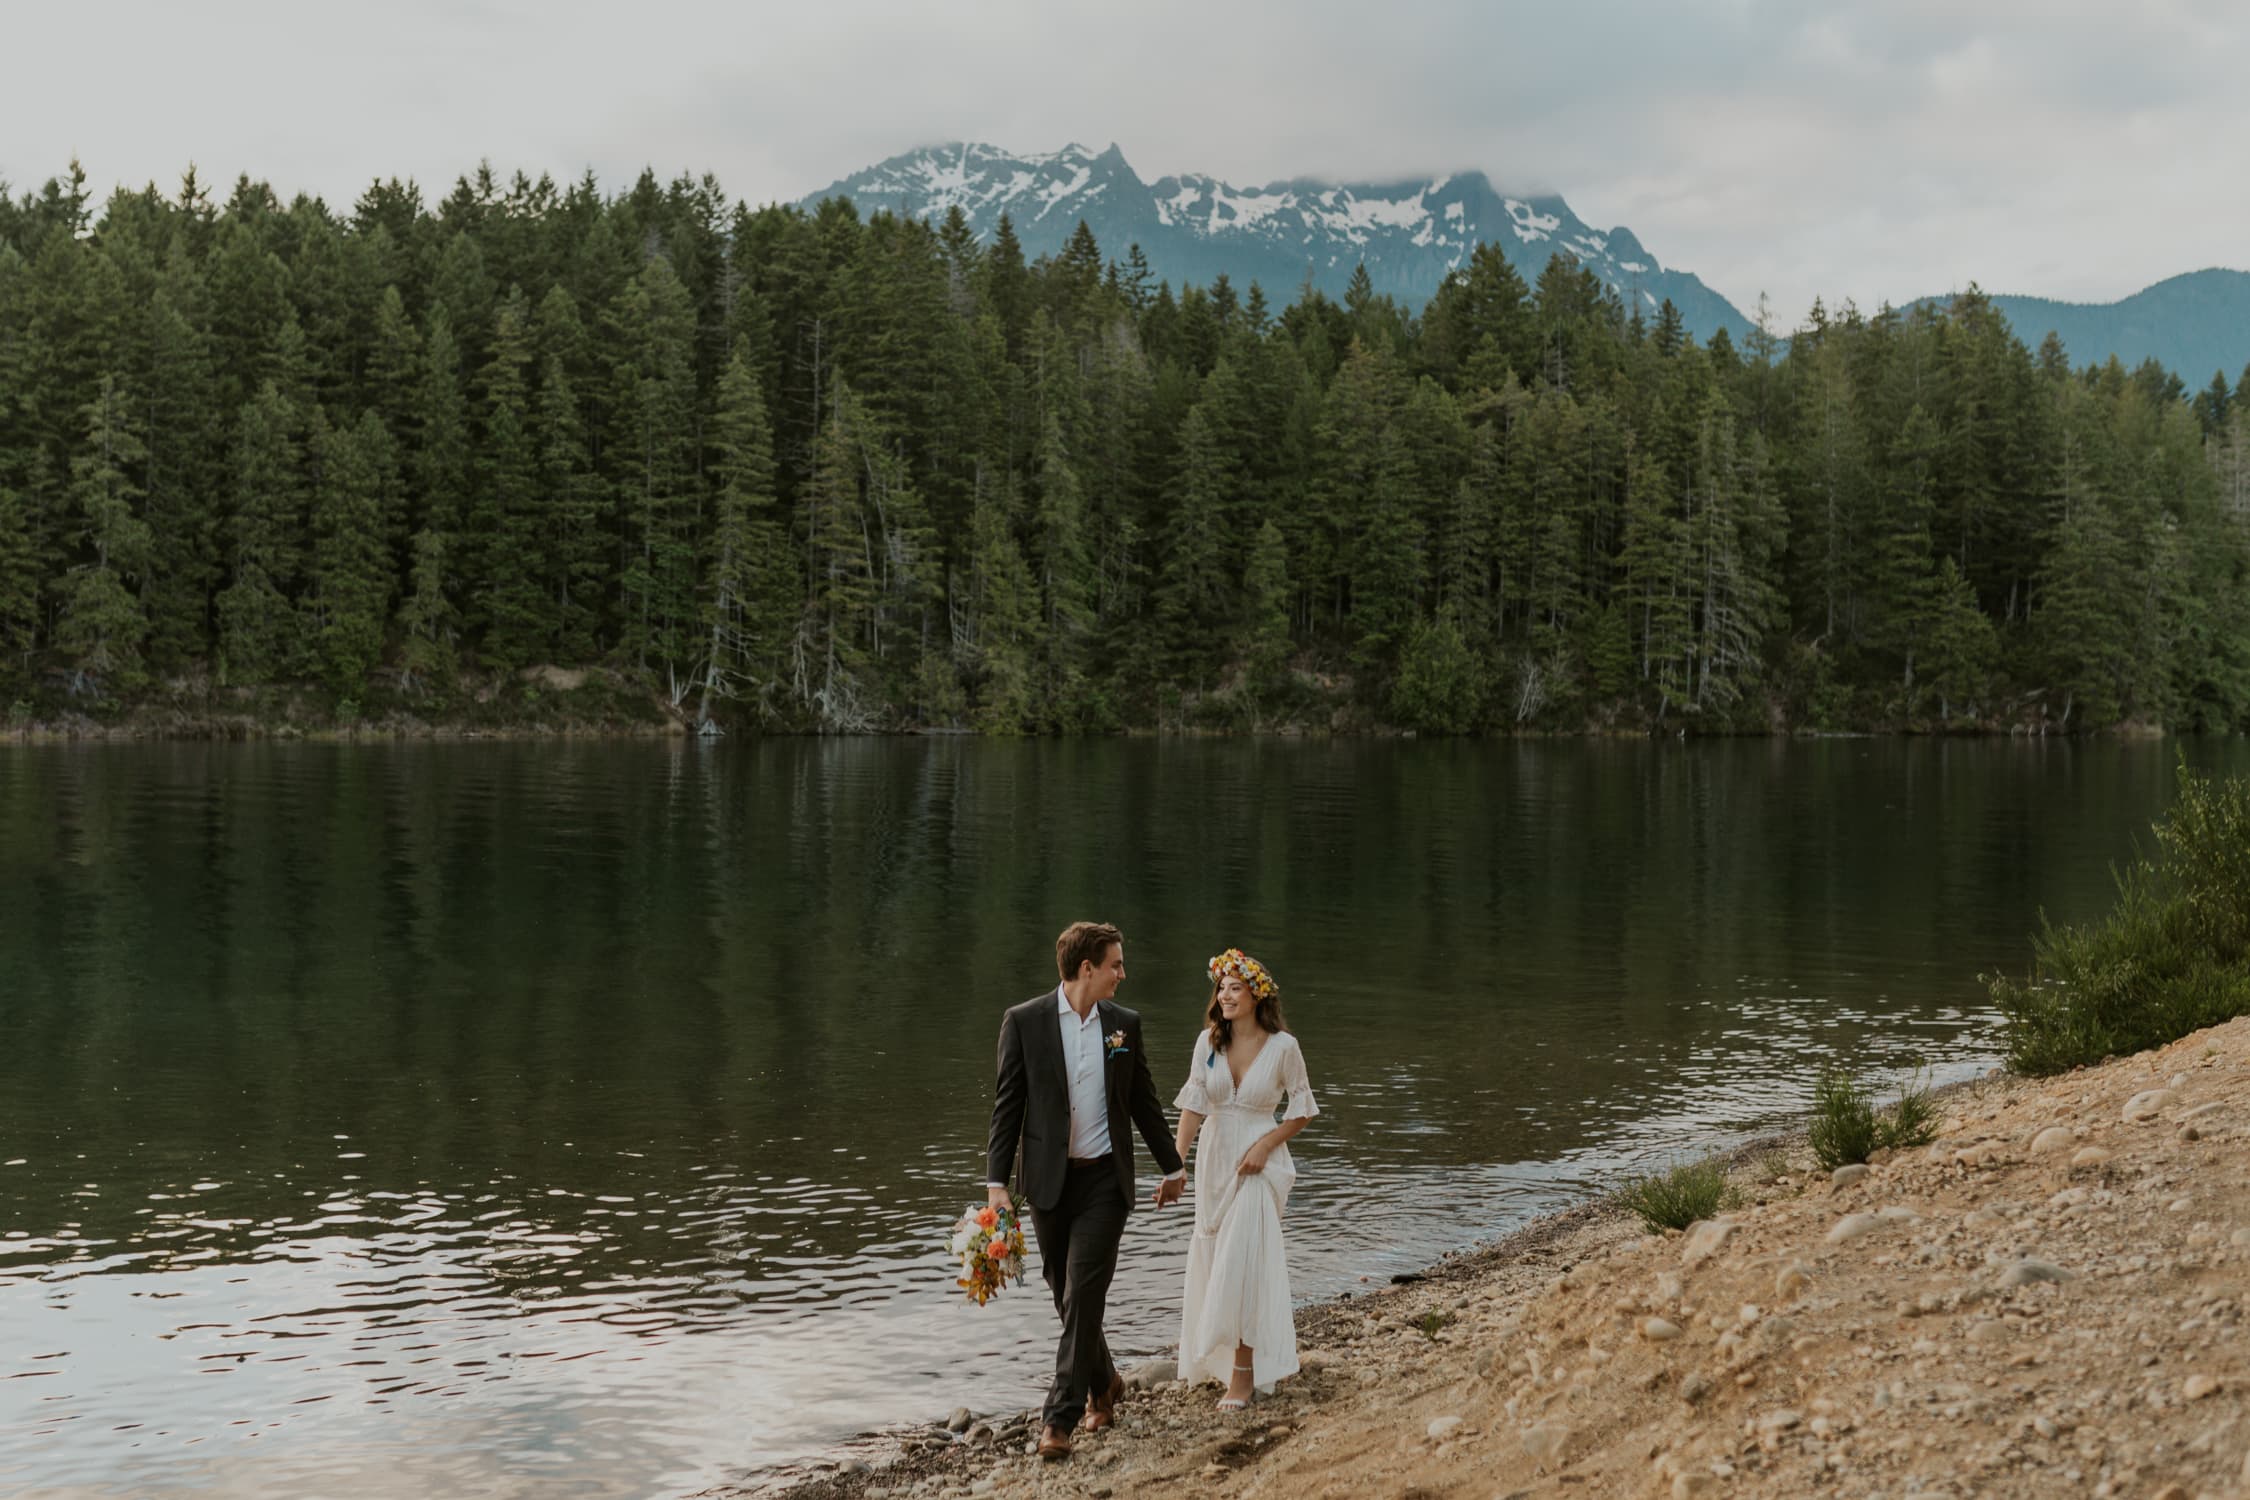 A bride and groom holding hands and walking along the shore of a lake in Washington State.